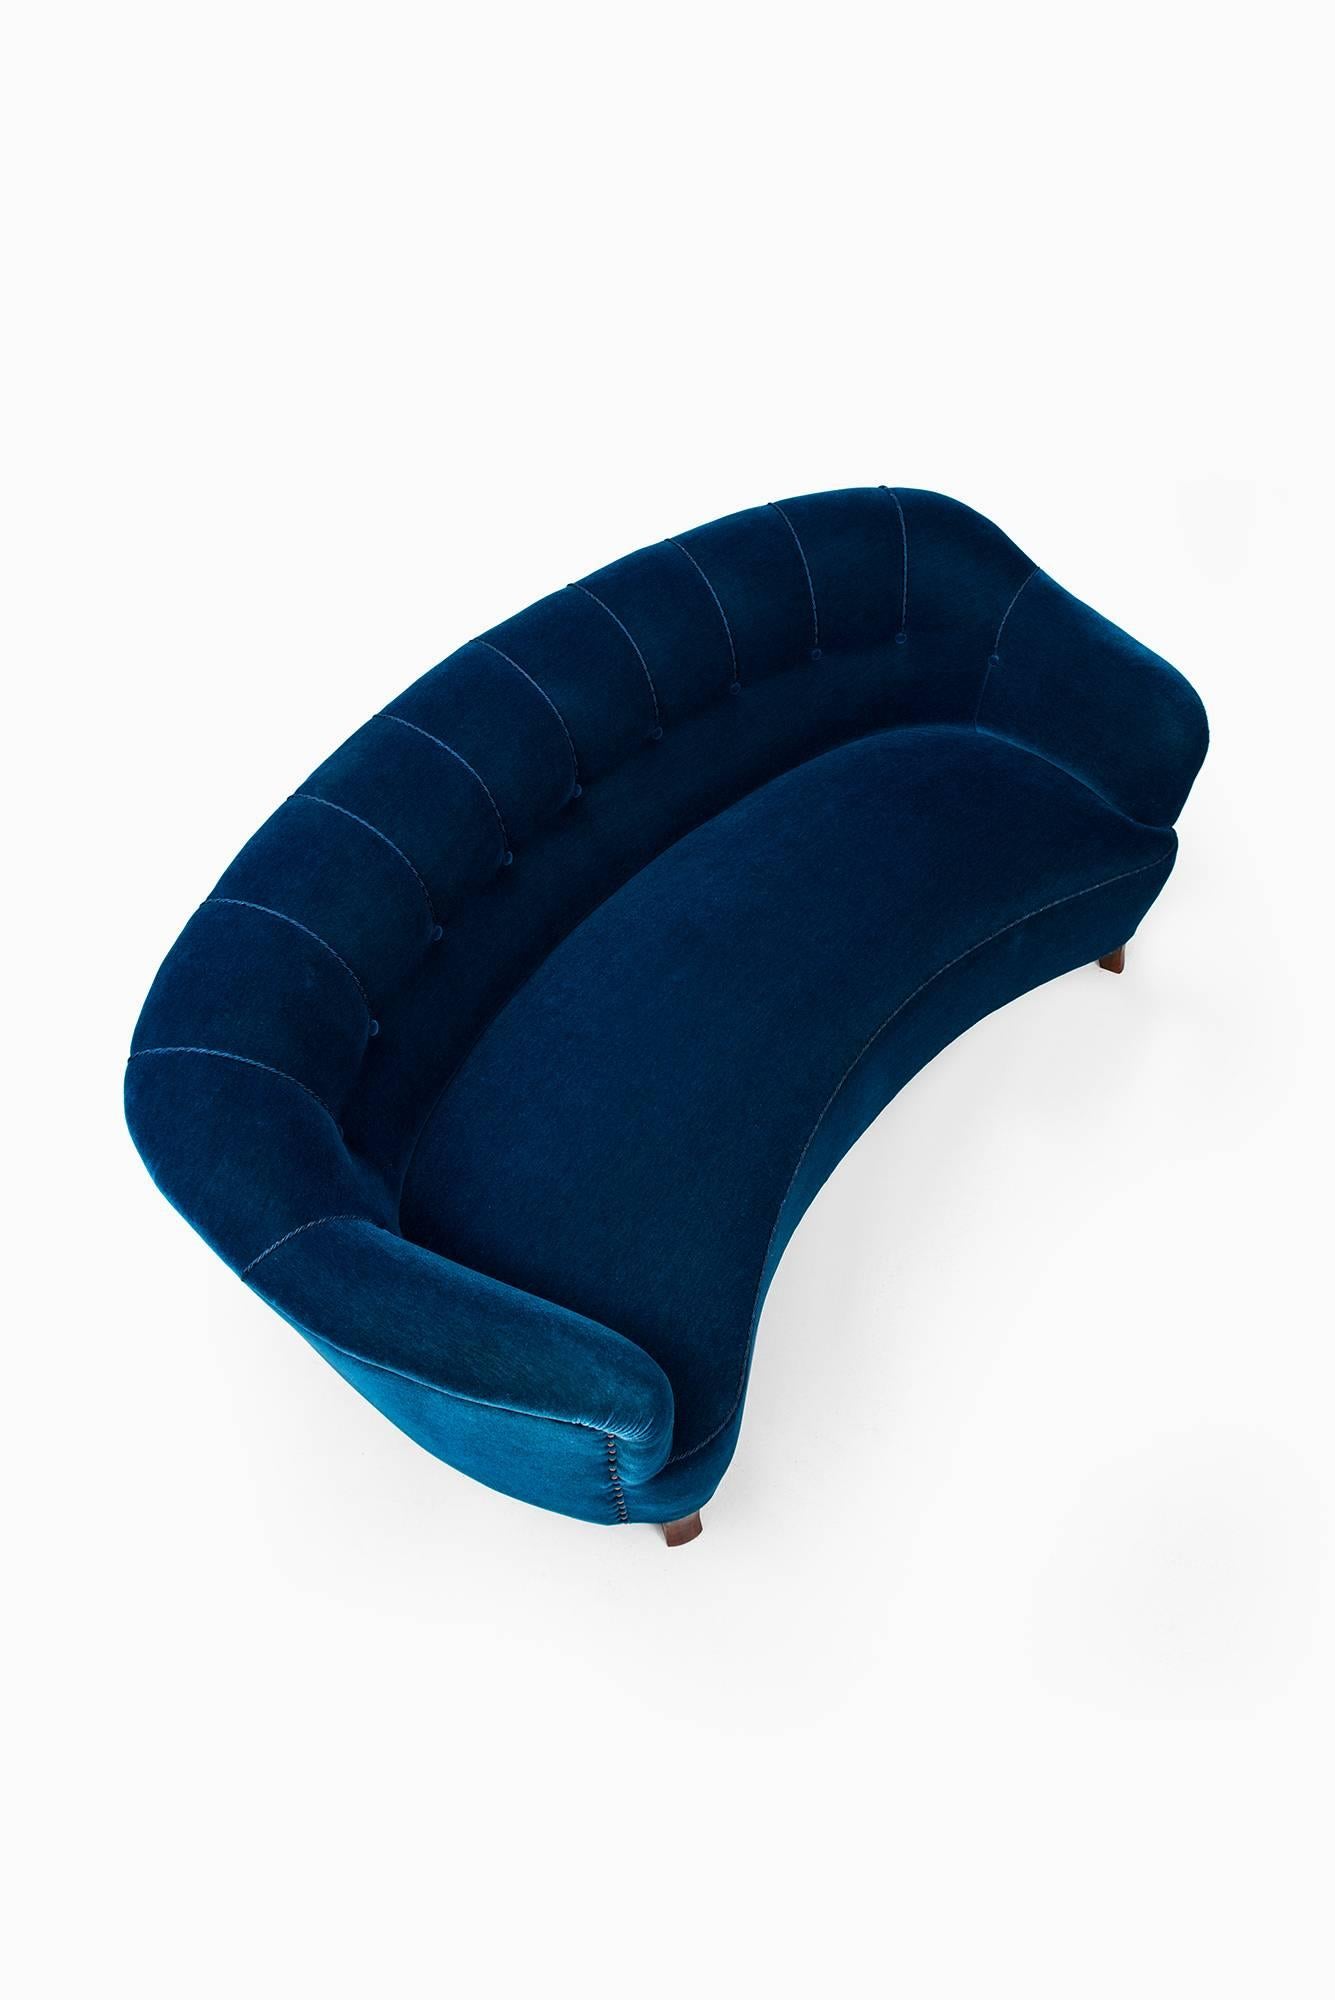 Curved Sofa in Blue Velvet Attributed to Otto Schulz 1